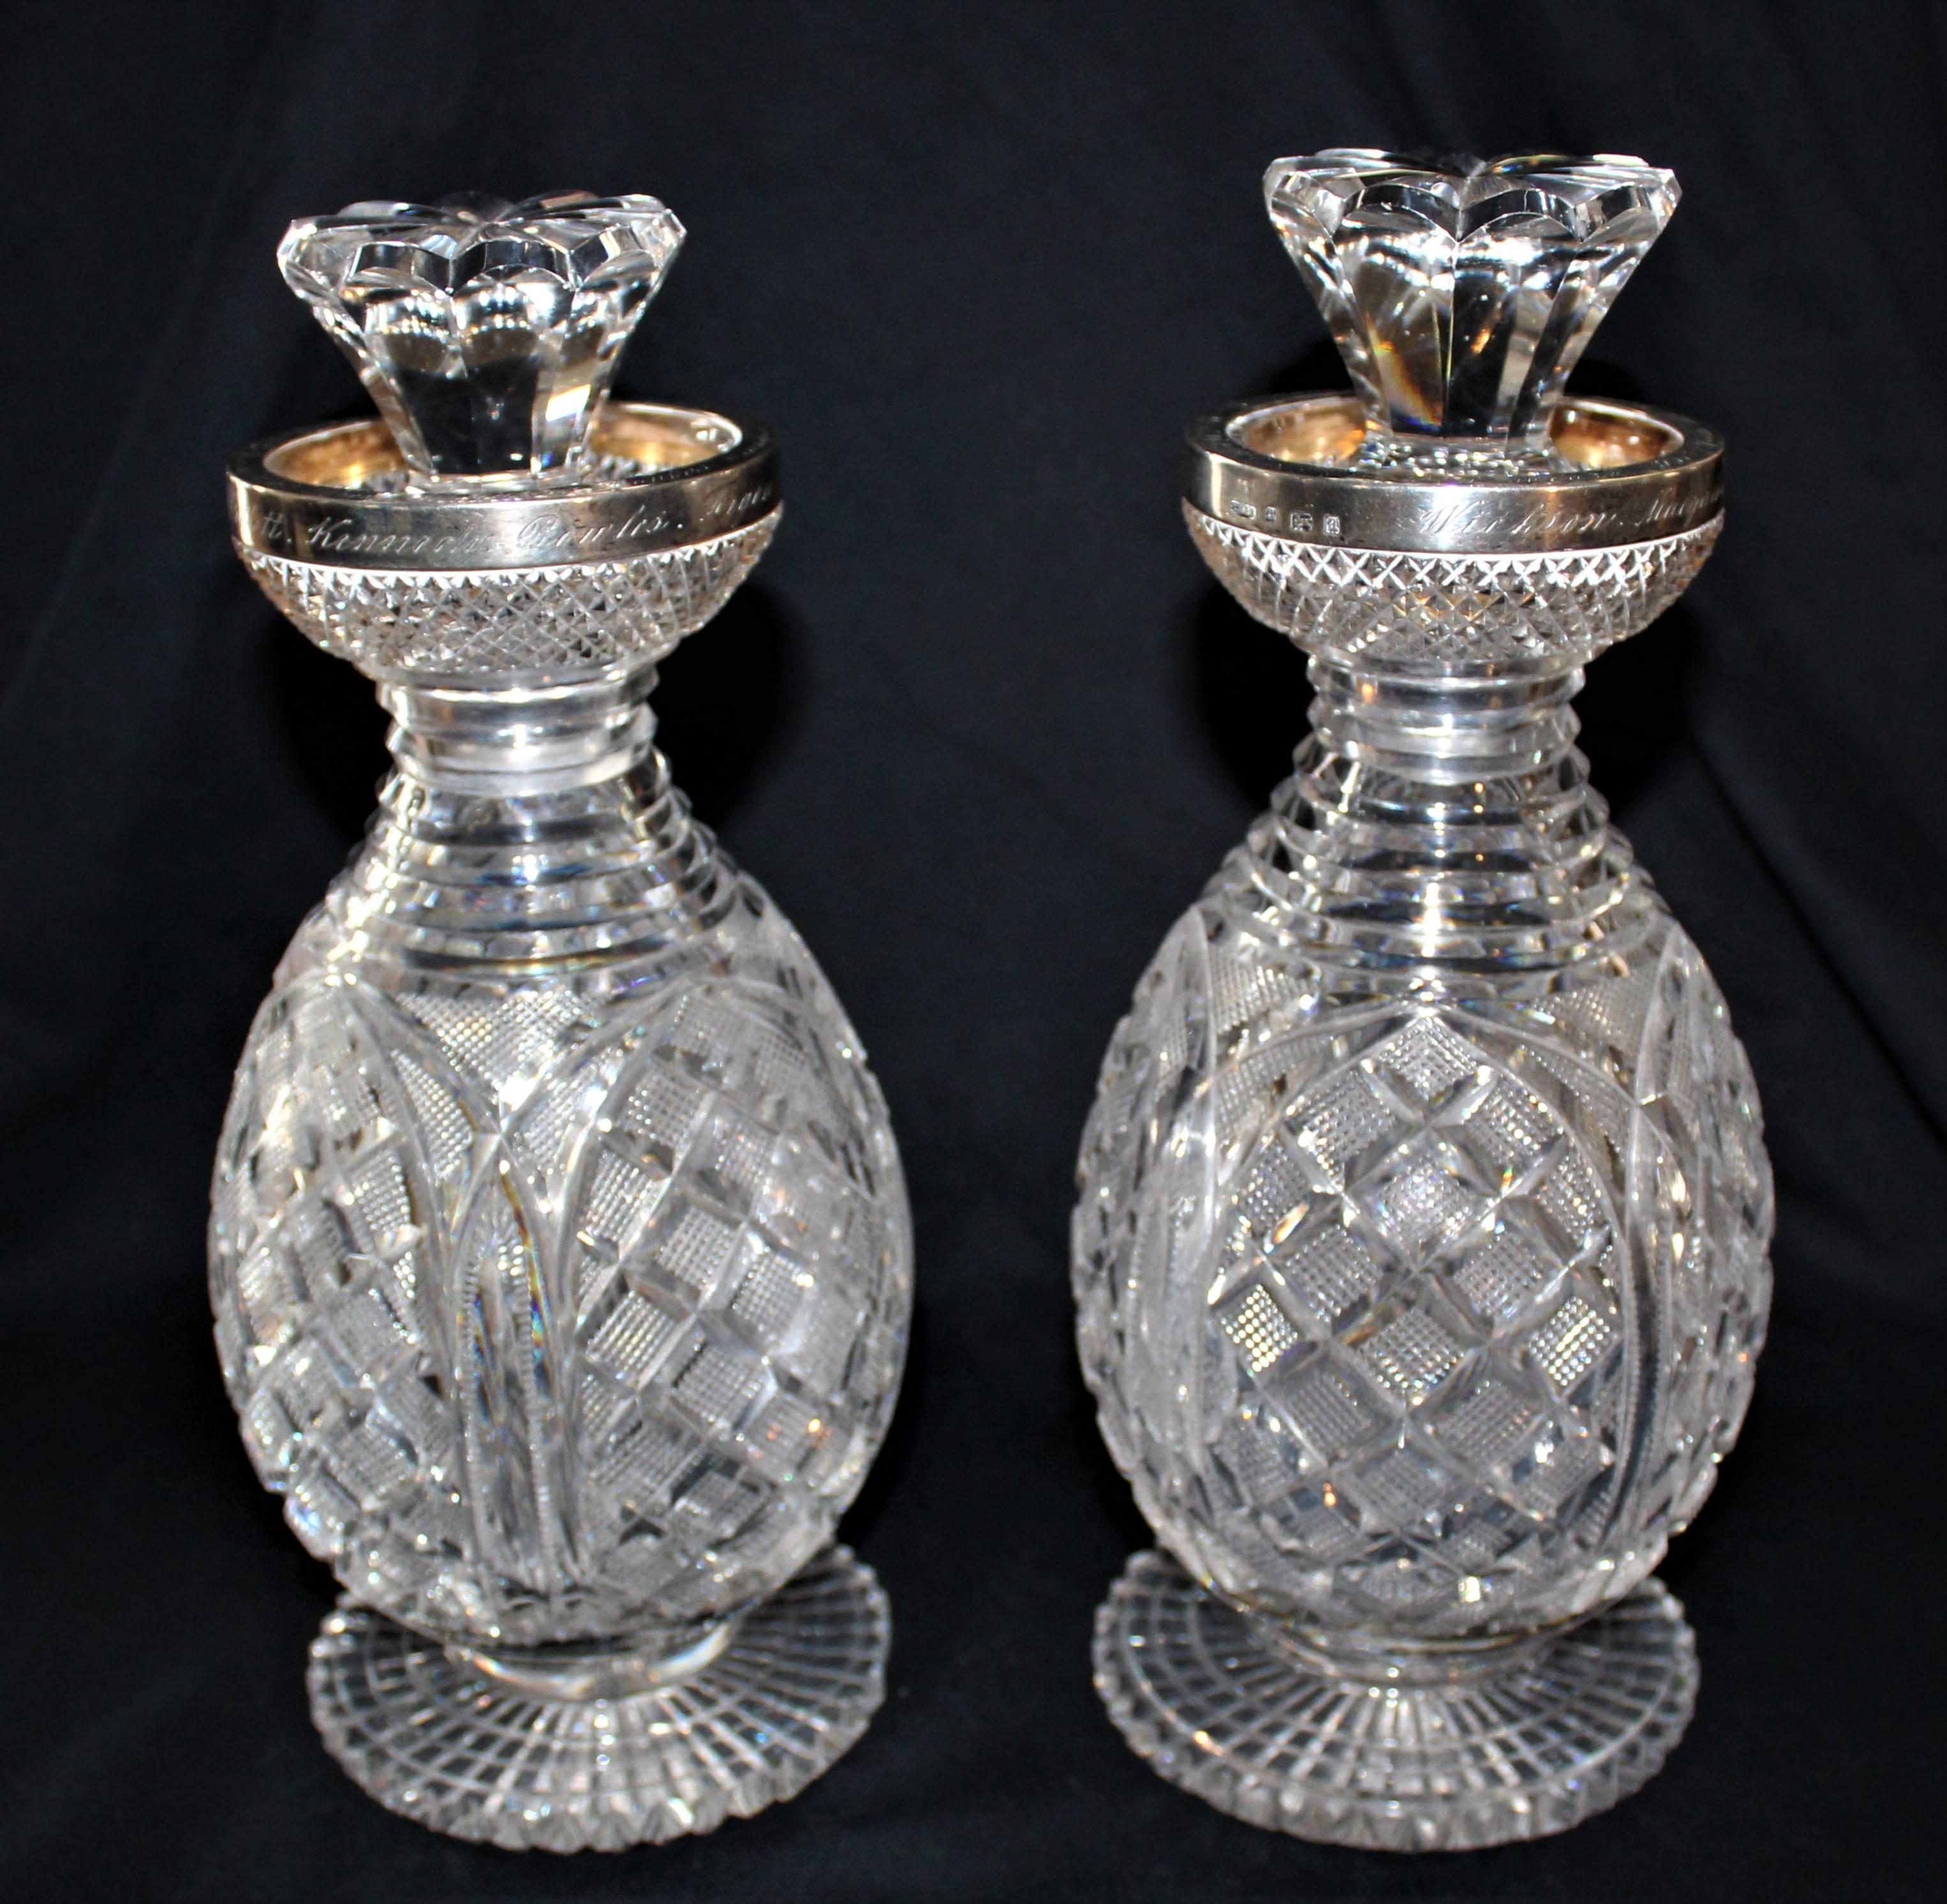 Victorian Pair of Cut Crystal and Sterling Silver Decanters, 1900, Birmingham England